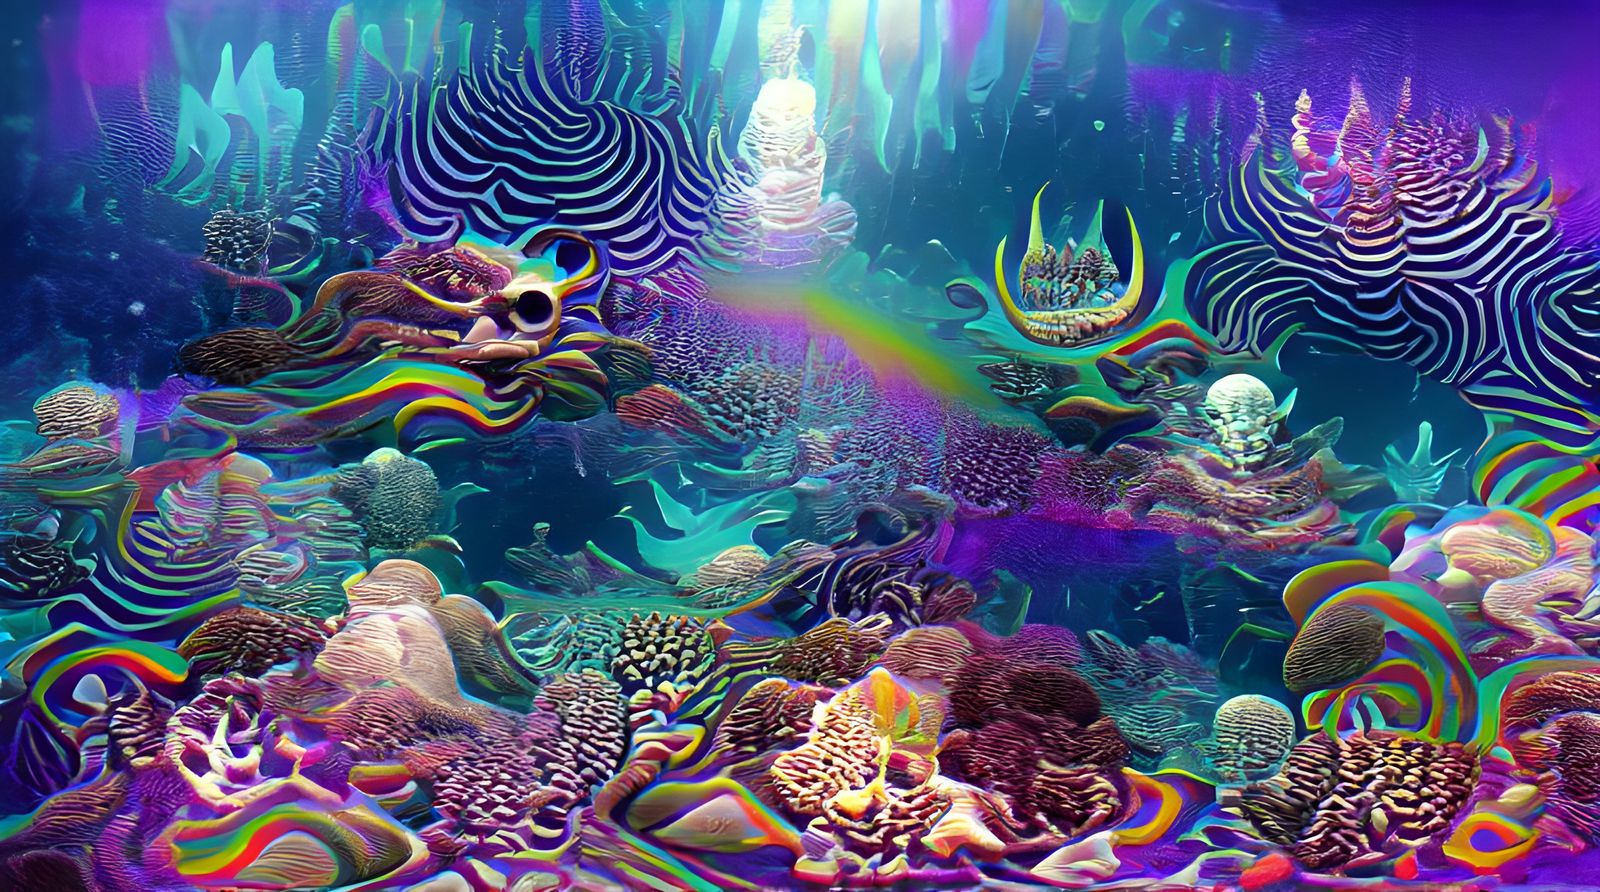 The endless depths of the ocean psychedelic 